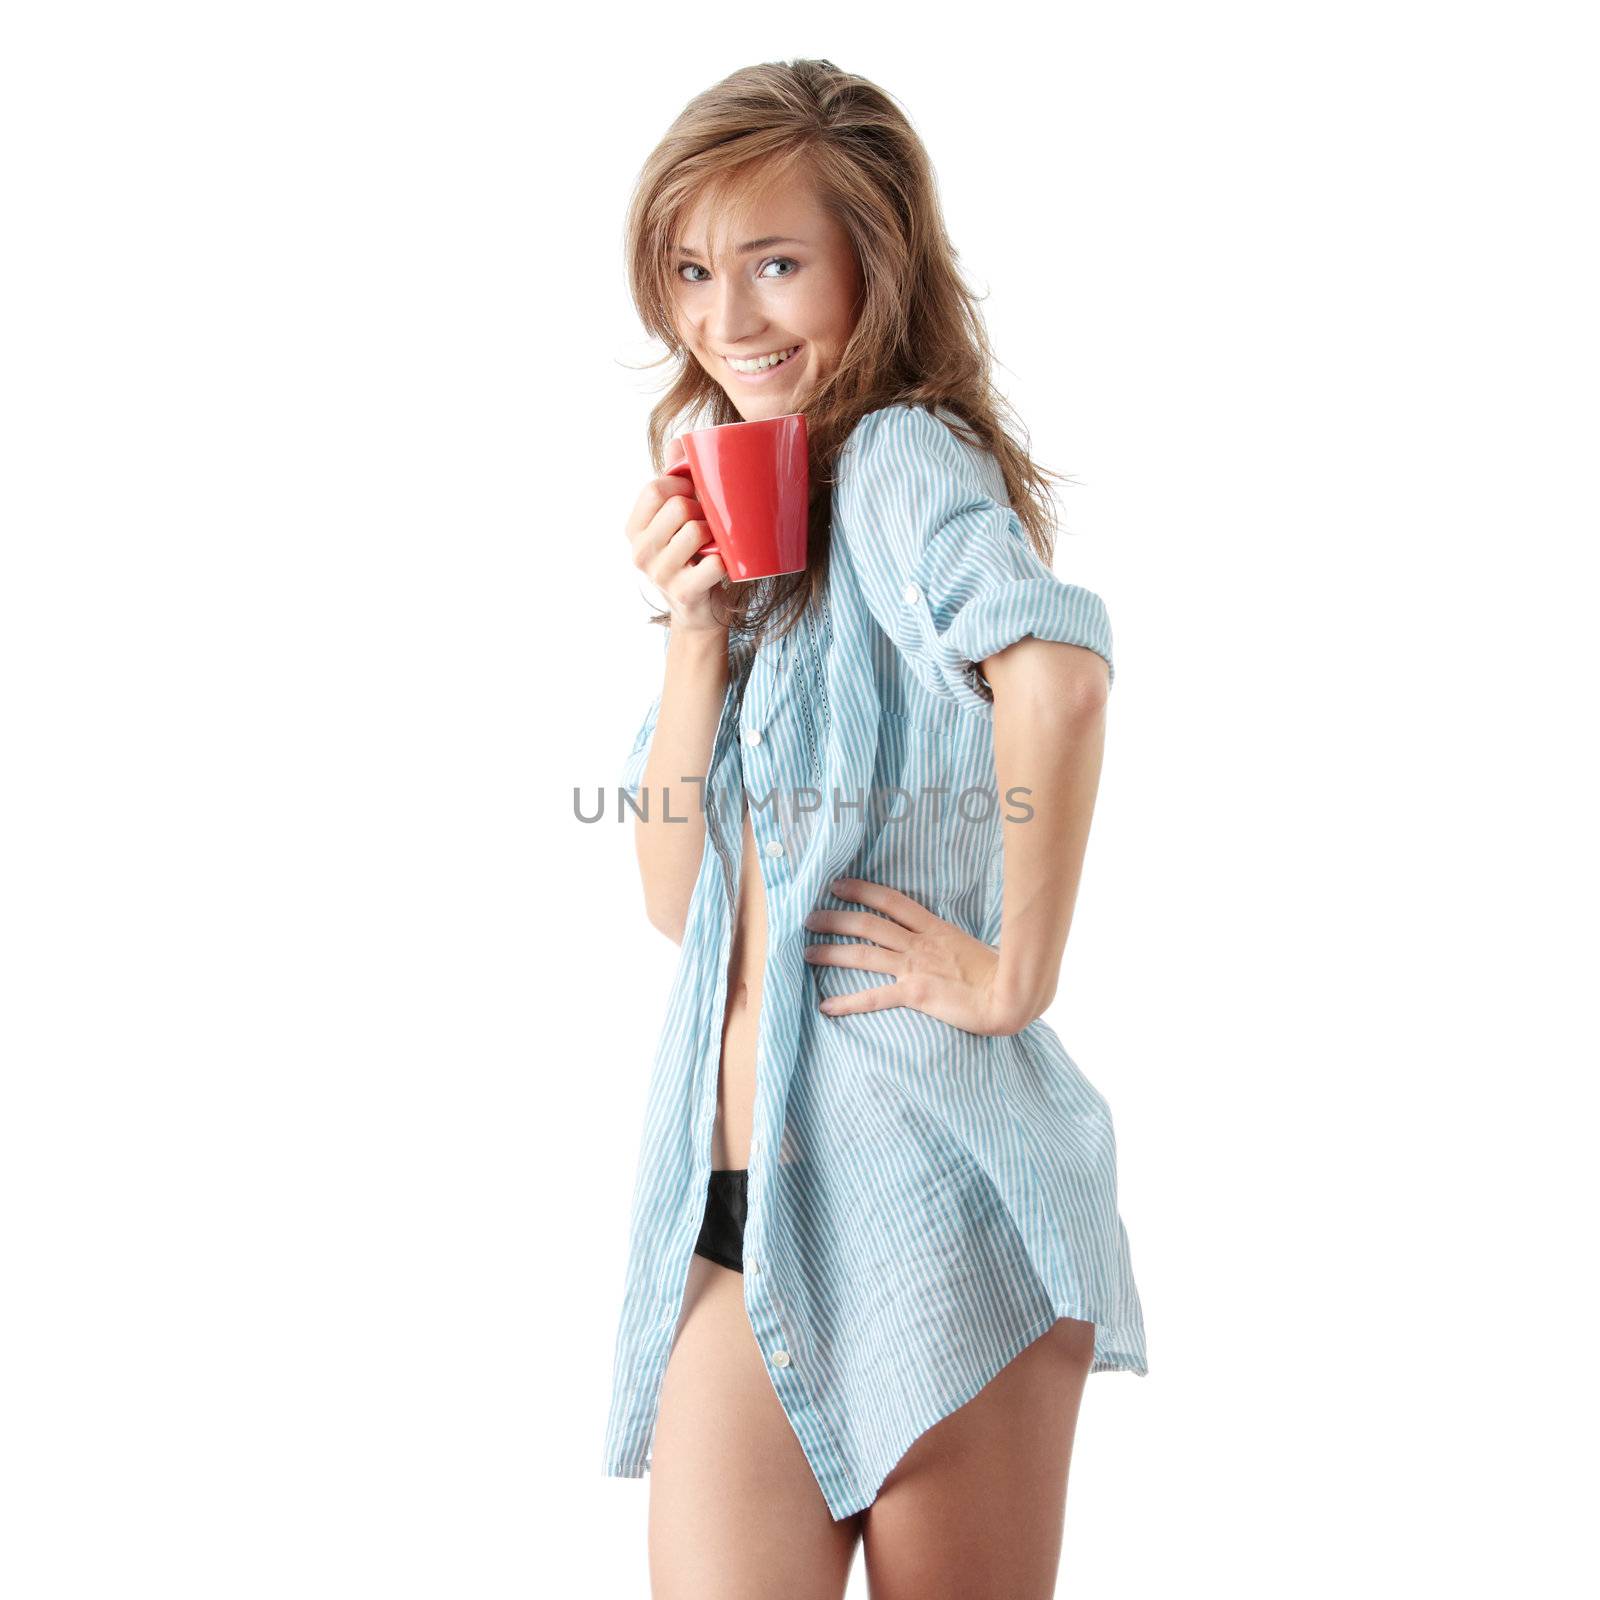 Woman drinks morning coffee or tea by BDS